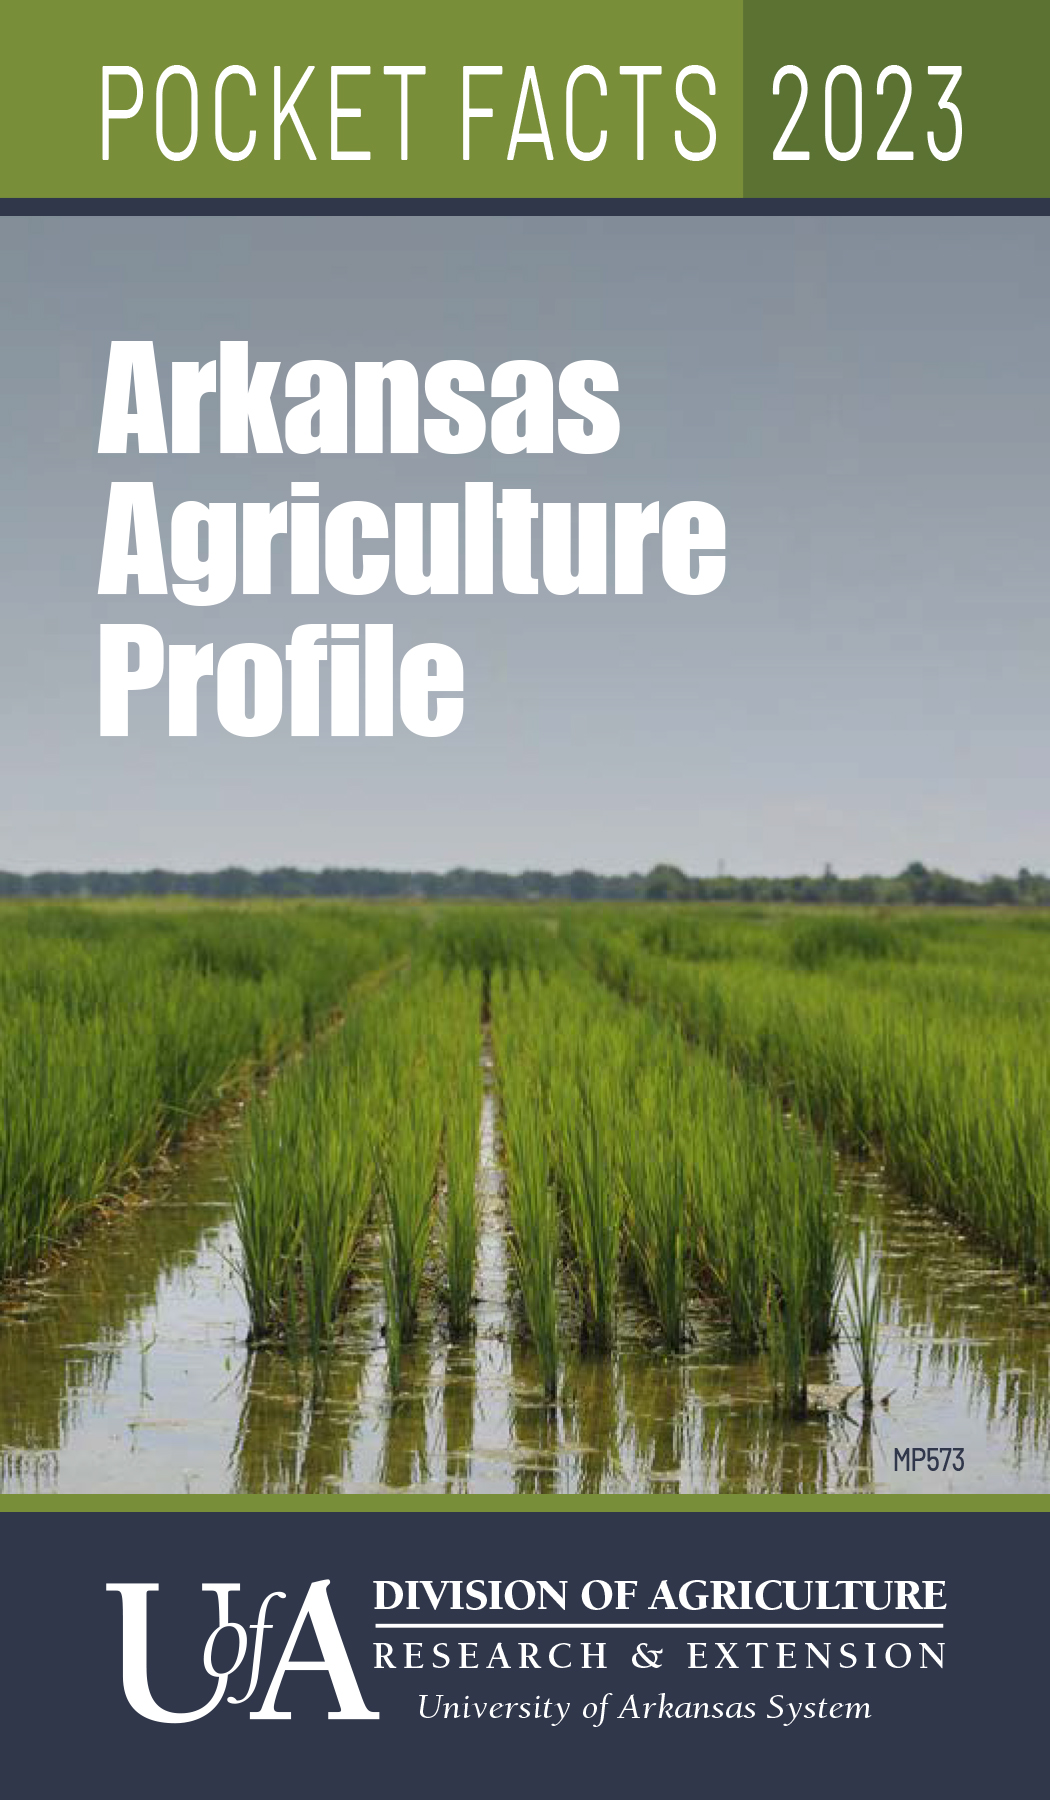 2022 Arkansas Agriculture Profile cover showing a flooded rice field